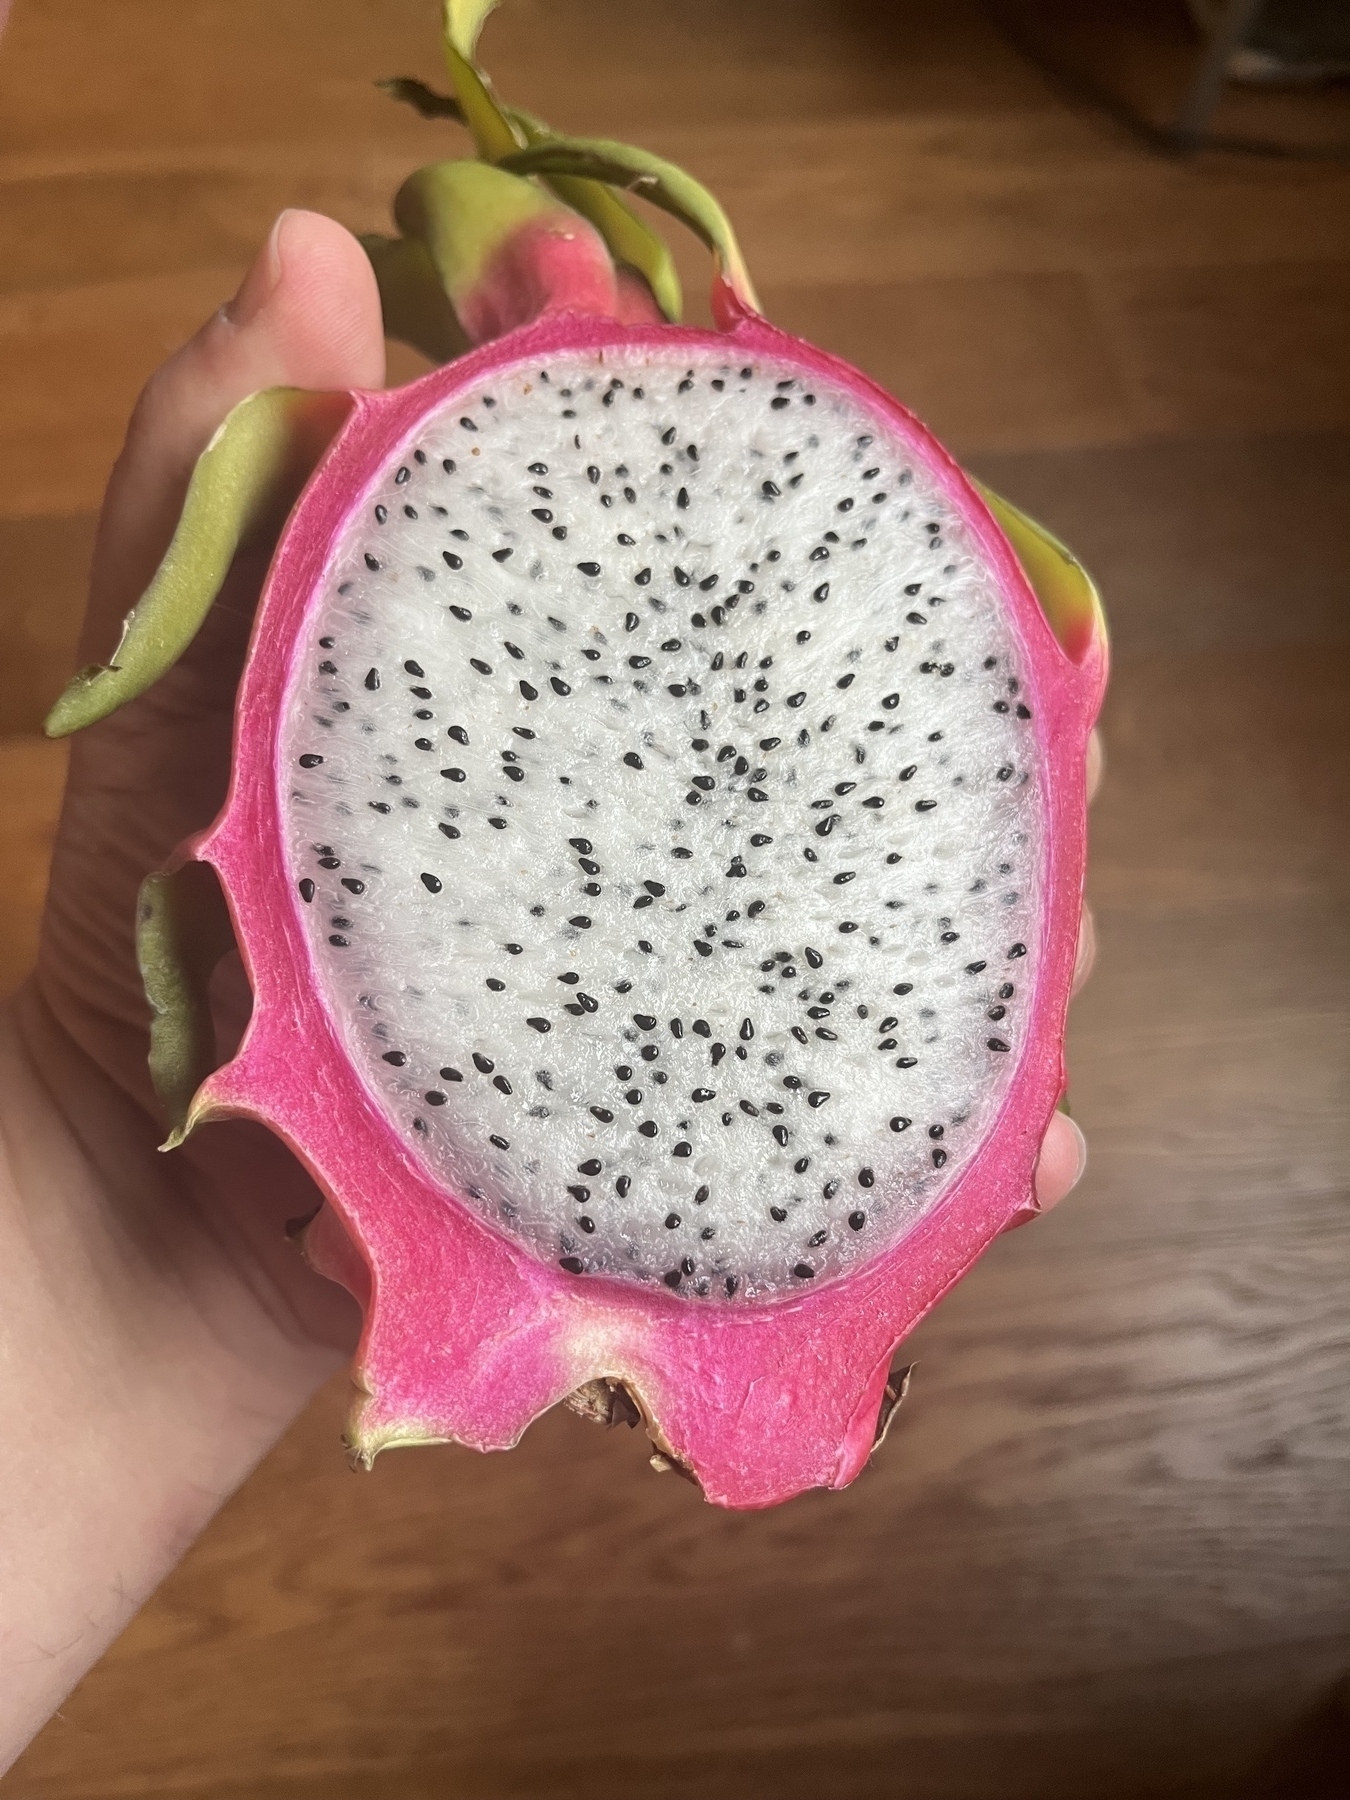 cut open side of a dragon fruit. White flesh small black seeds and the bright red skin of the fruit